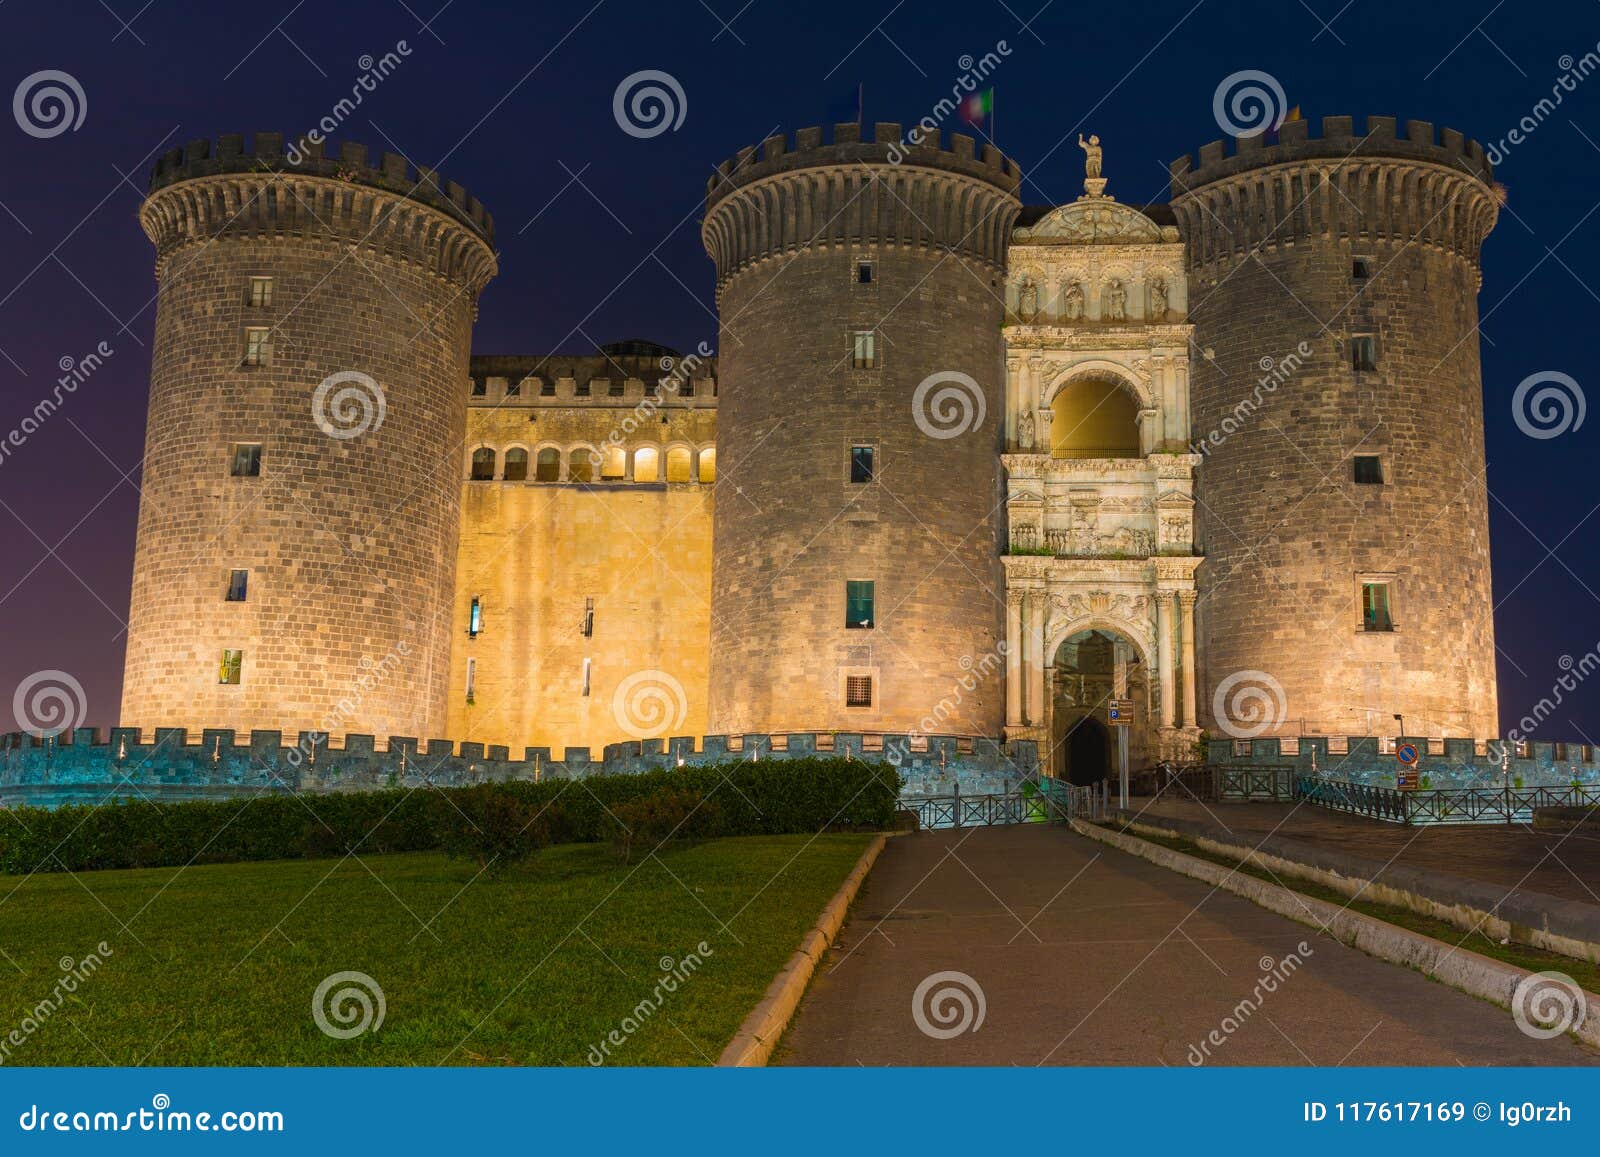 night view of castel nuovo in naples, italy